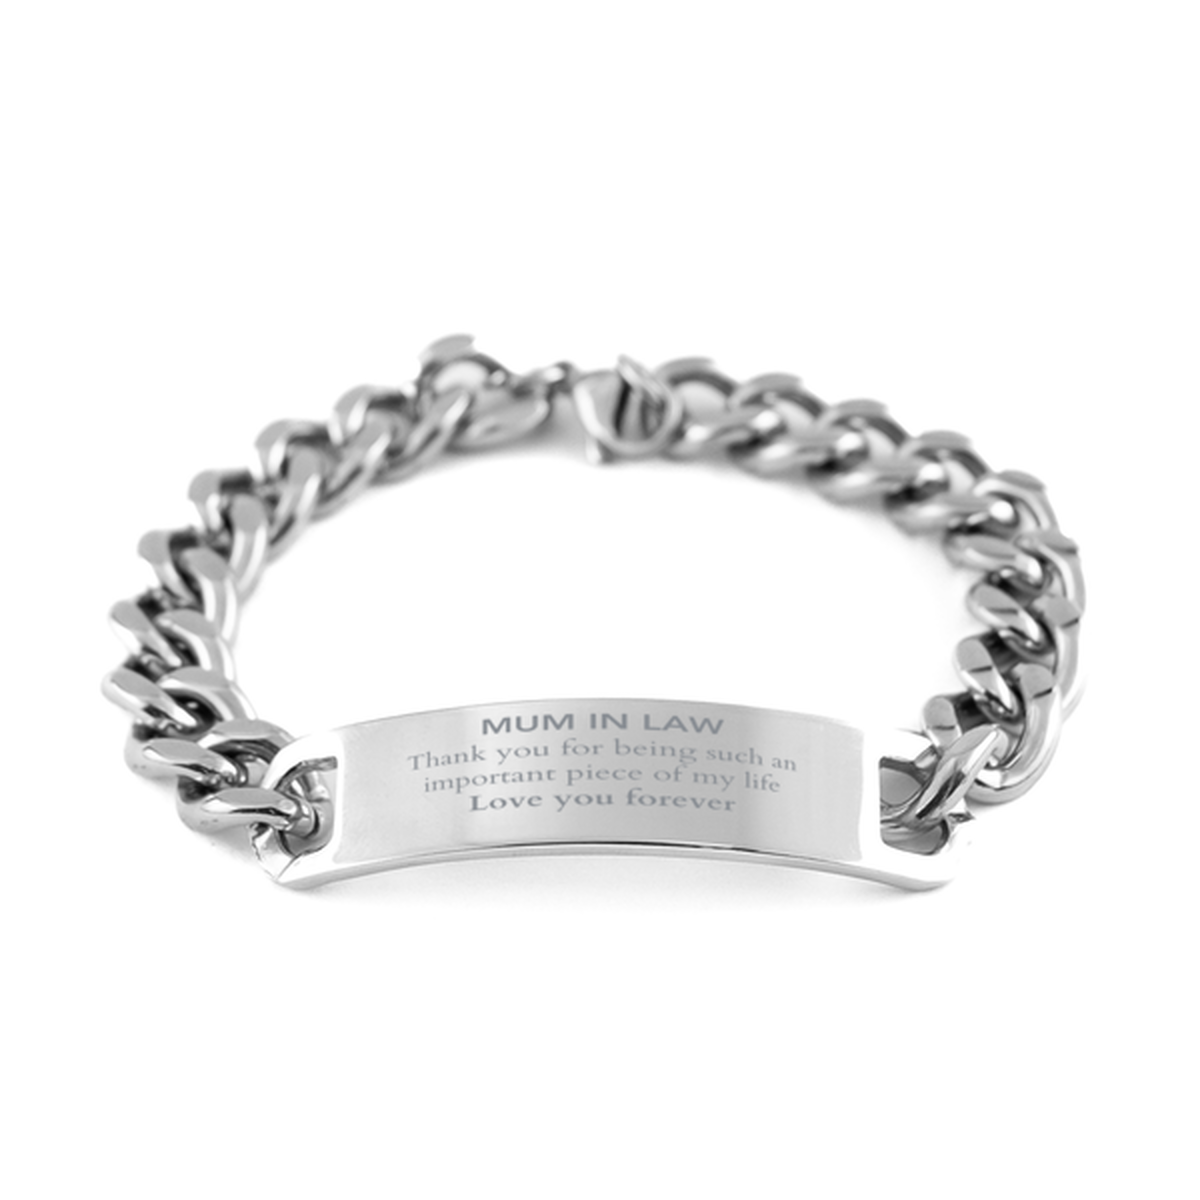 Appropriate Mum In Law  Cuban Chain Stainless Steel Bracelet Epic Birthday Gifts for Mum In Law  Thank you for being such an important piece of my life Mum In Law  Christmas Mothers Fathers Day